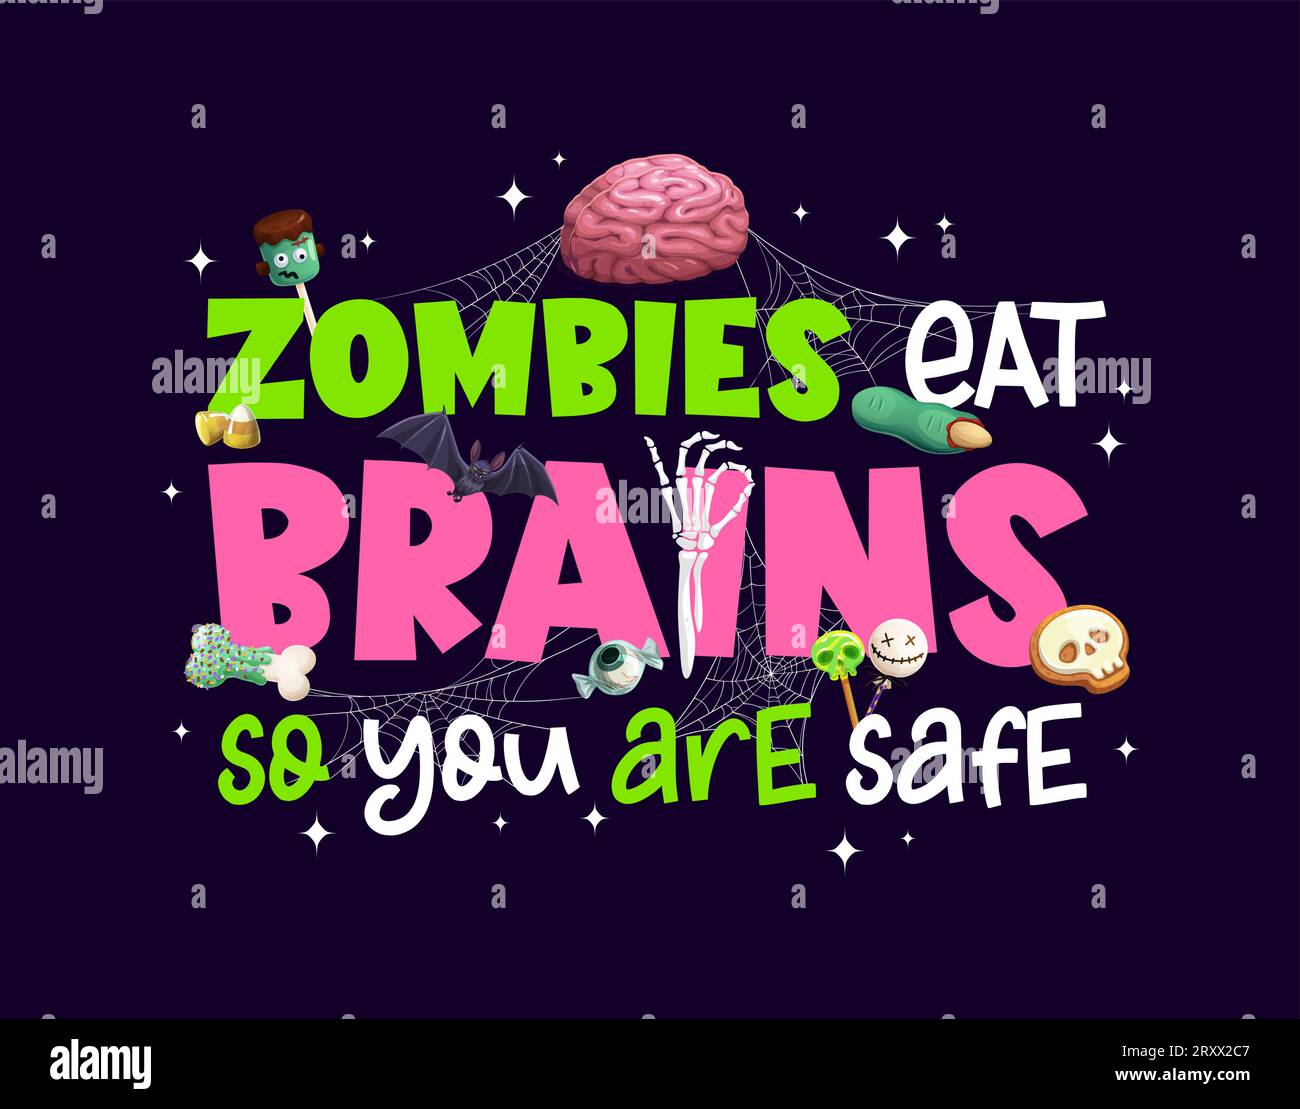 https://c8.alamy.com/comp/2RXX2C7/halloween-quote-zombies-eat-brains-so-you-are-safe-for-horror-night-holiday-vector-t-shirt-print-halloween-treat-or-treat-party-quote-with-zombie-skeleton-hand-skull-and-bone-sweets-in-spiderweb-2RXX2C7.jpg